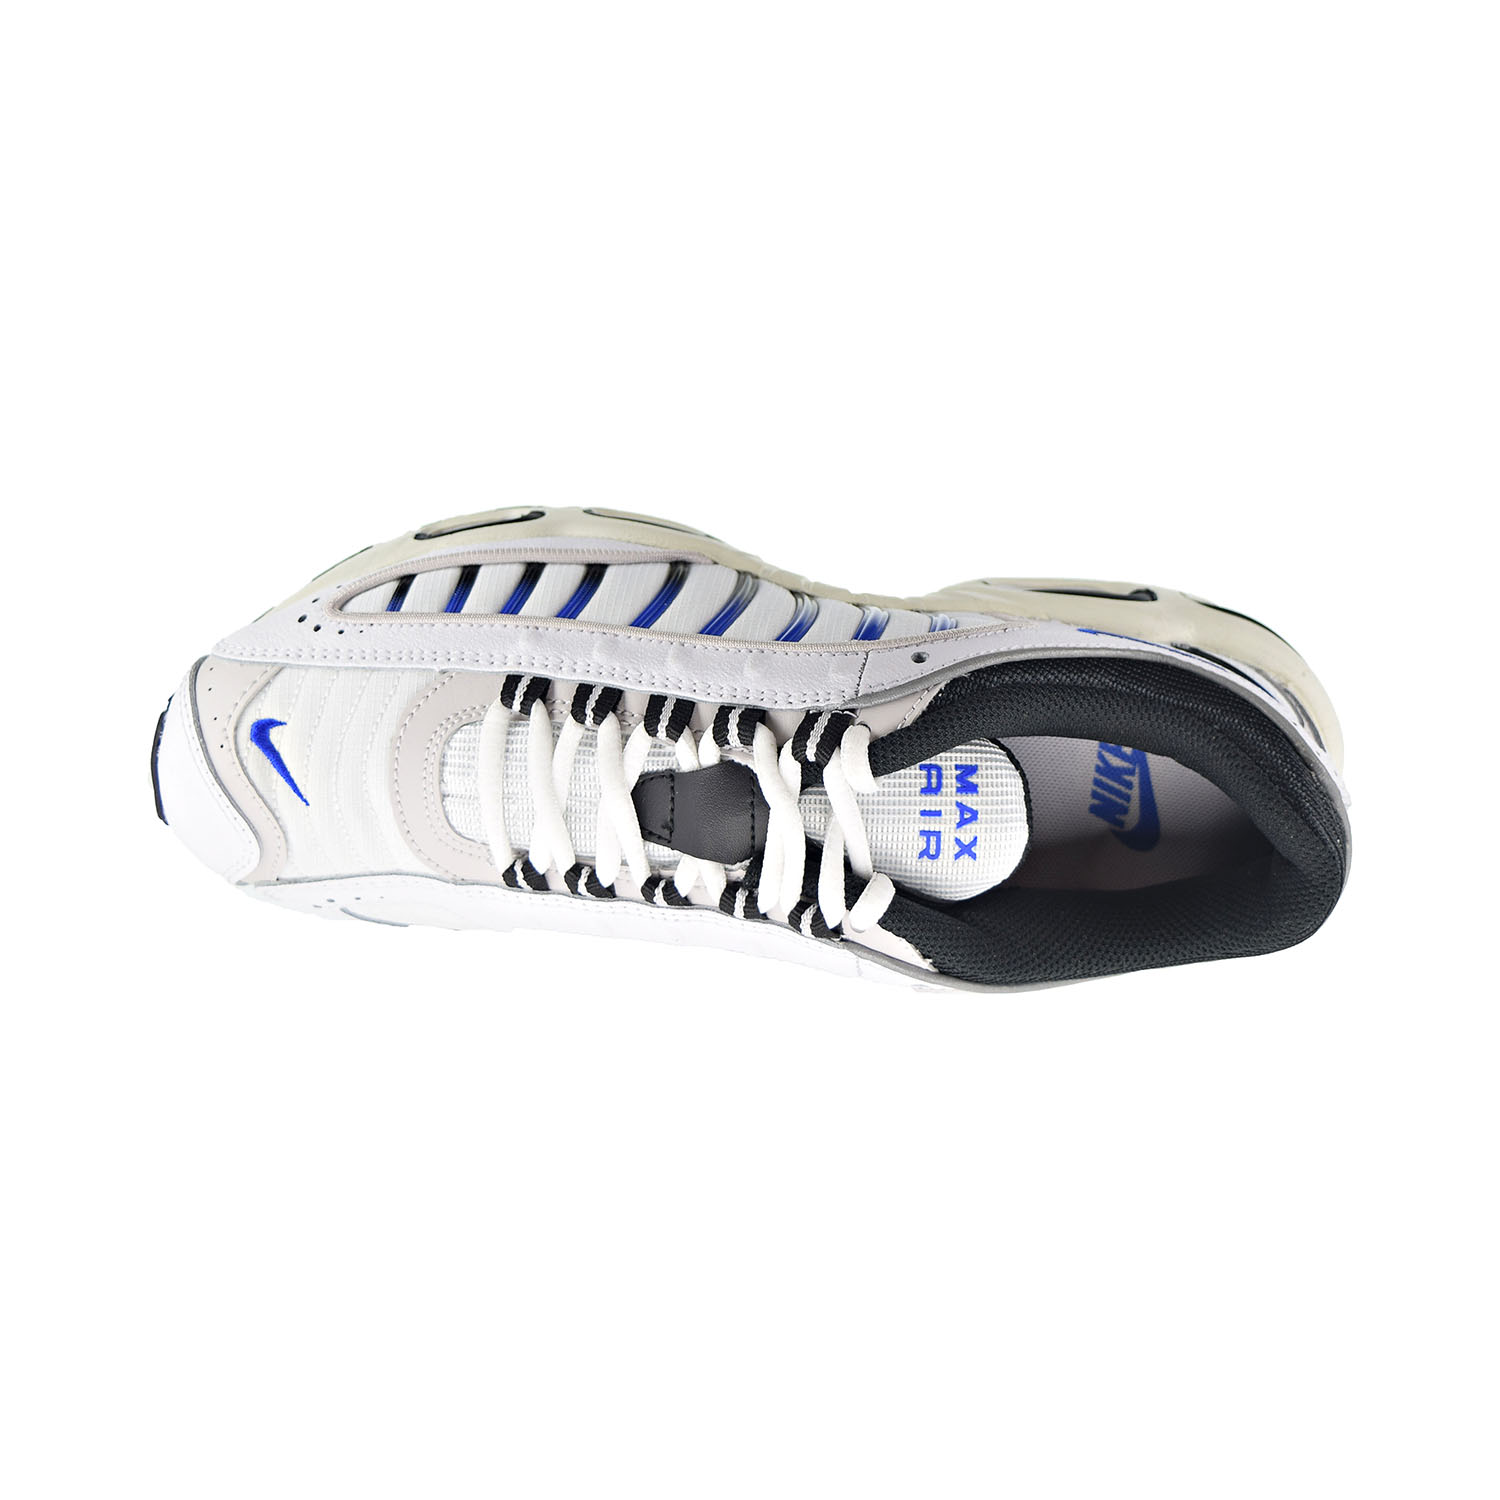 Nike Air Max Tailwind IV Men's Shoes White-Summit White-Vast aq2567-105 - image 5 of 6